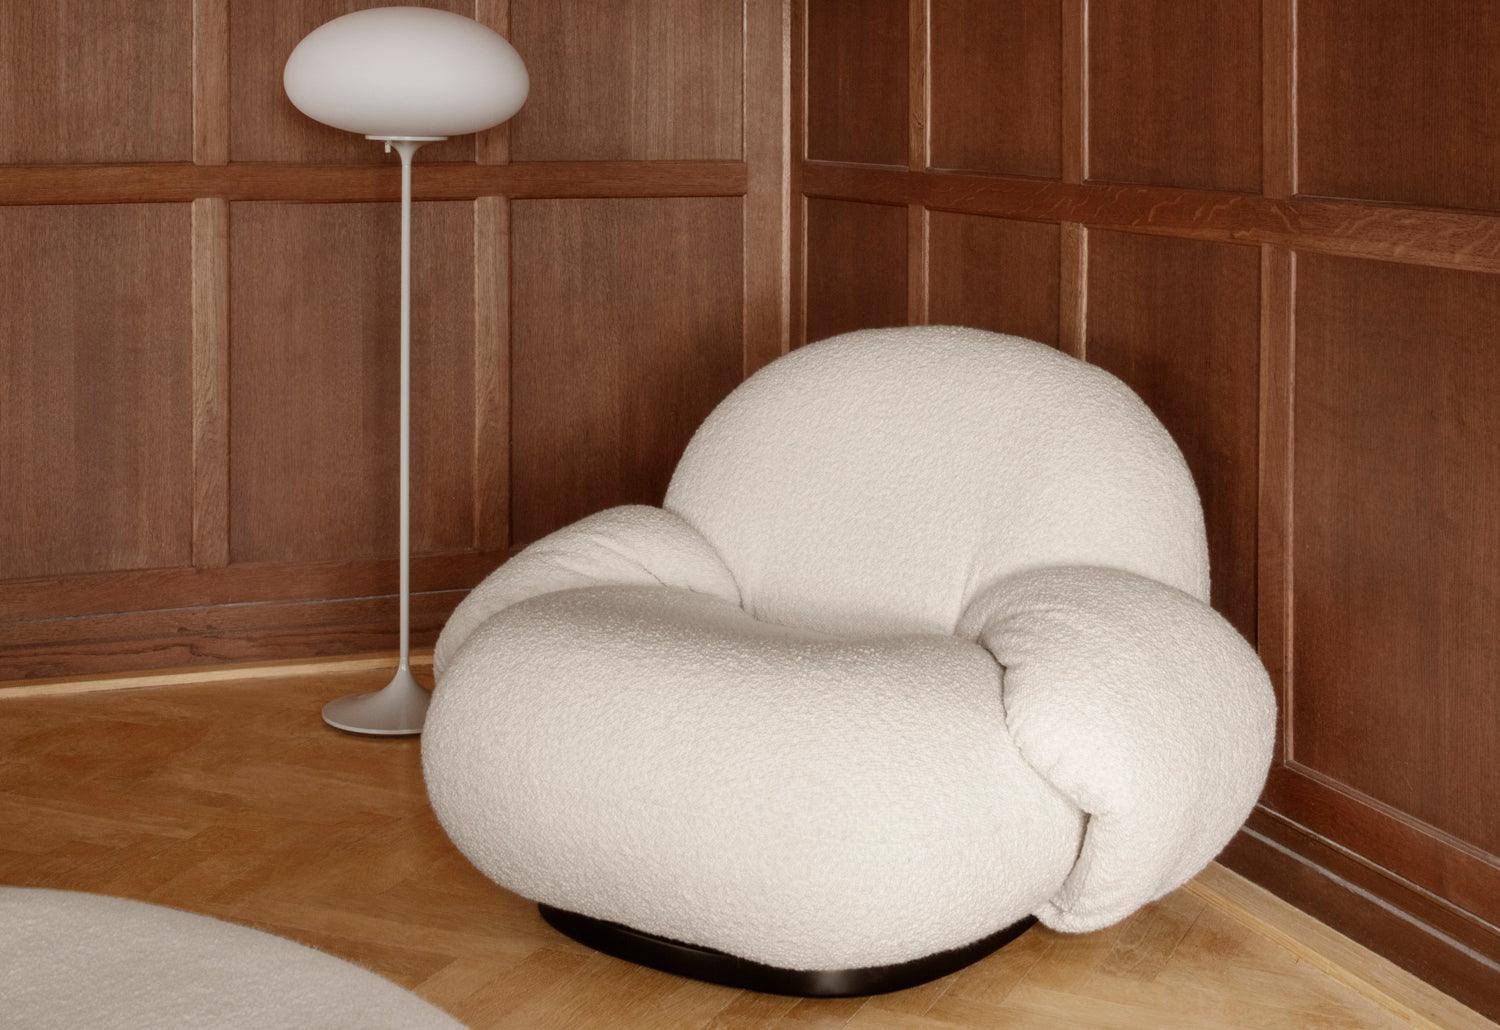 Price listed for starting fabric.
Curvaceous, soft and low-slung, the Pacha lounge chair is a joyfully modernist creation which embraces both extreme comfort and effortless versatility. Iconic designer Pierre Paulin’s vision was to create a